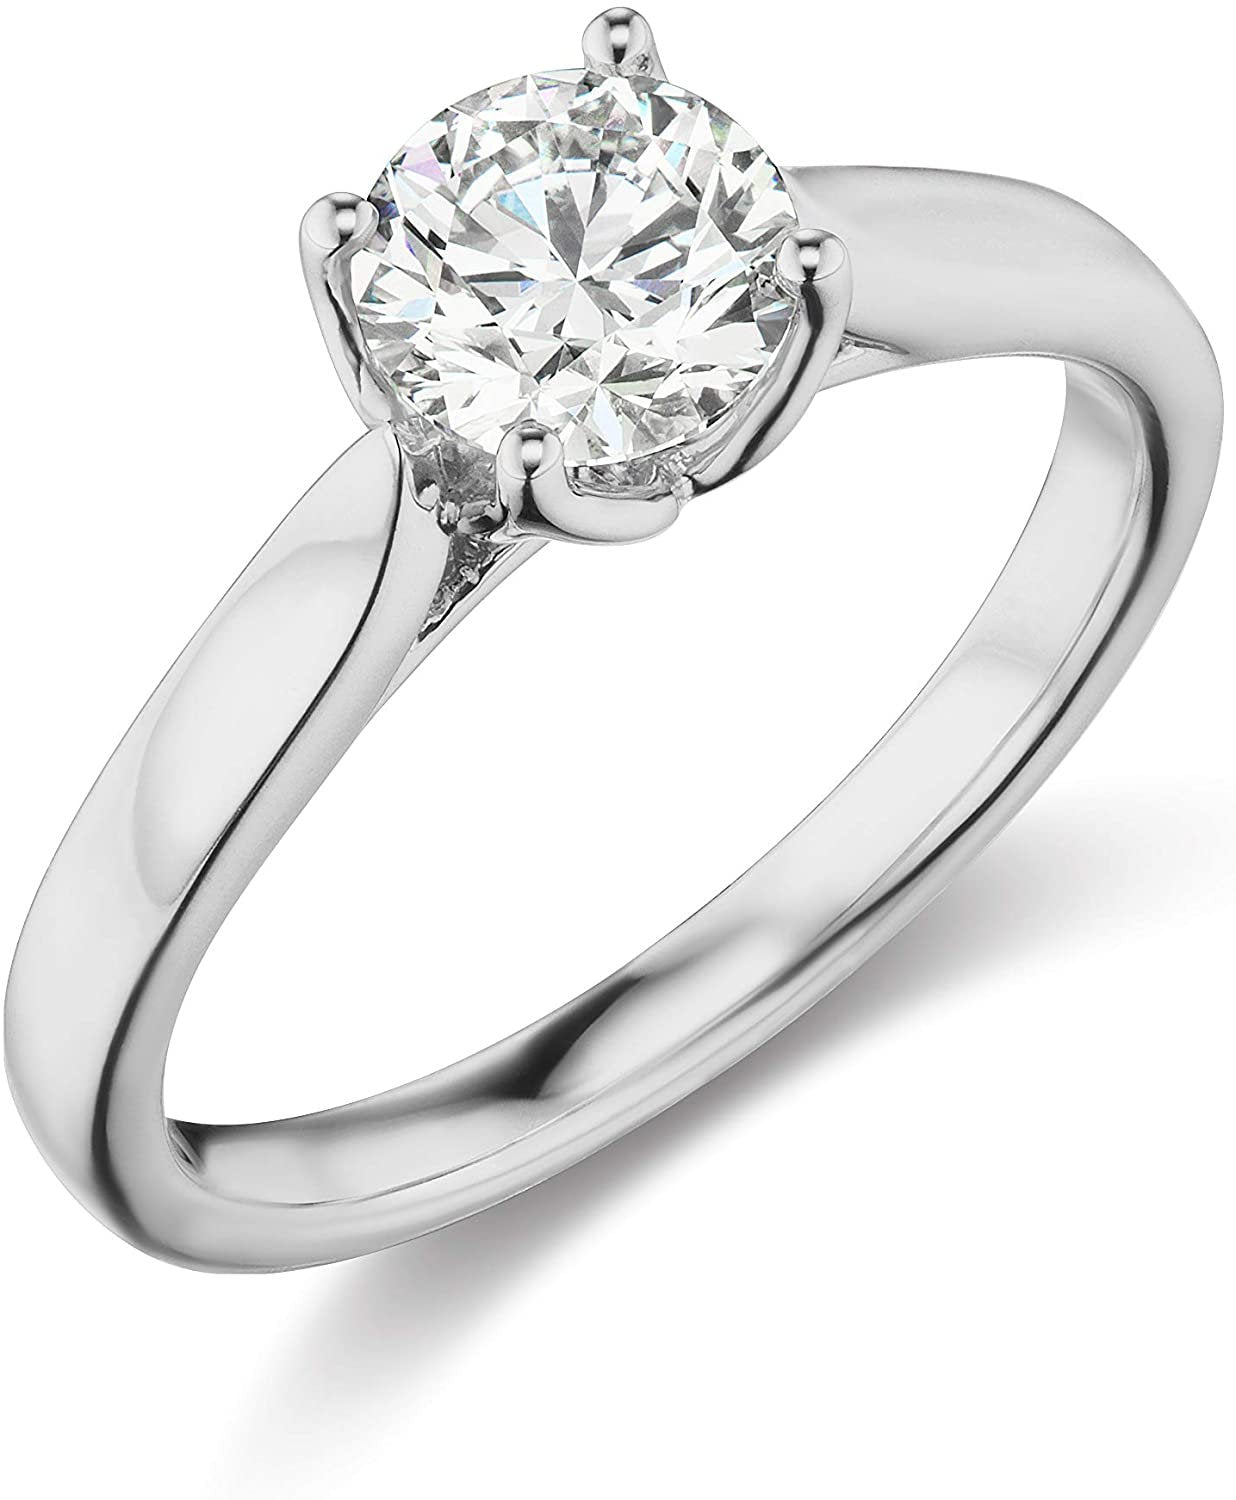 IGI Certified 1.0 Carat Round Brilliant-Cut Lab Created Diamond 14K Gold Classic 4-Prong Solitaire Engagement Ring (I-J Color, VS1-VS2 Clarity) - 14K White Gold, Size 7-3/4